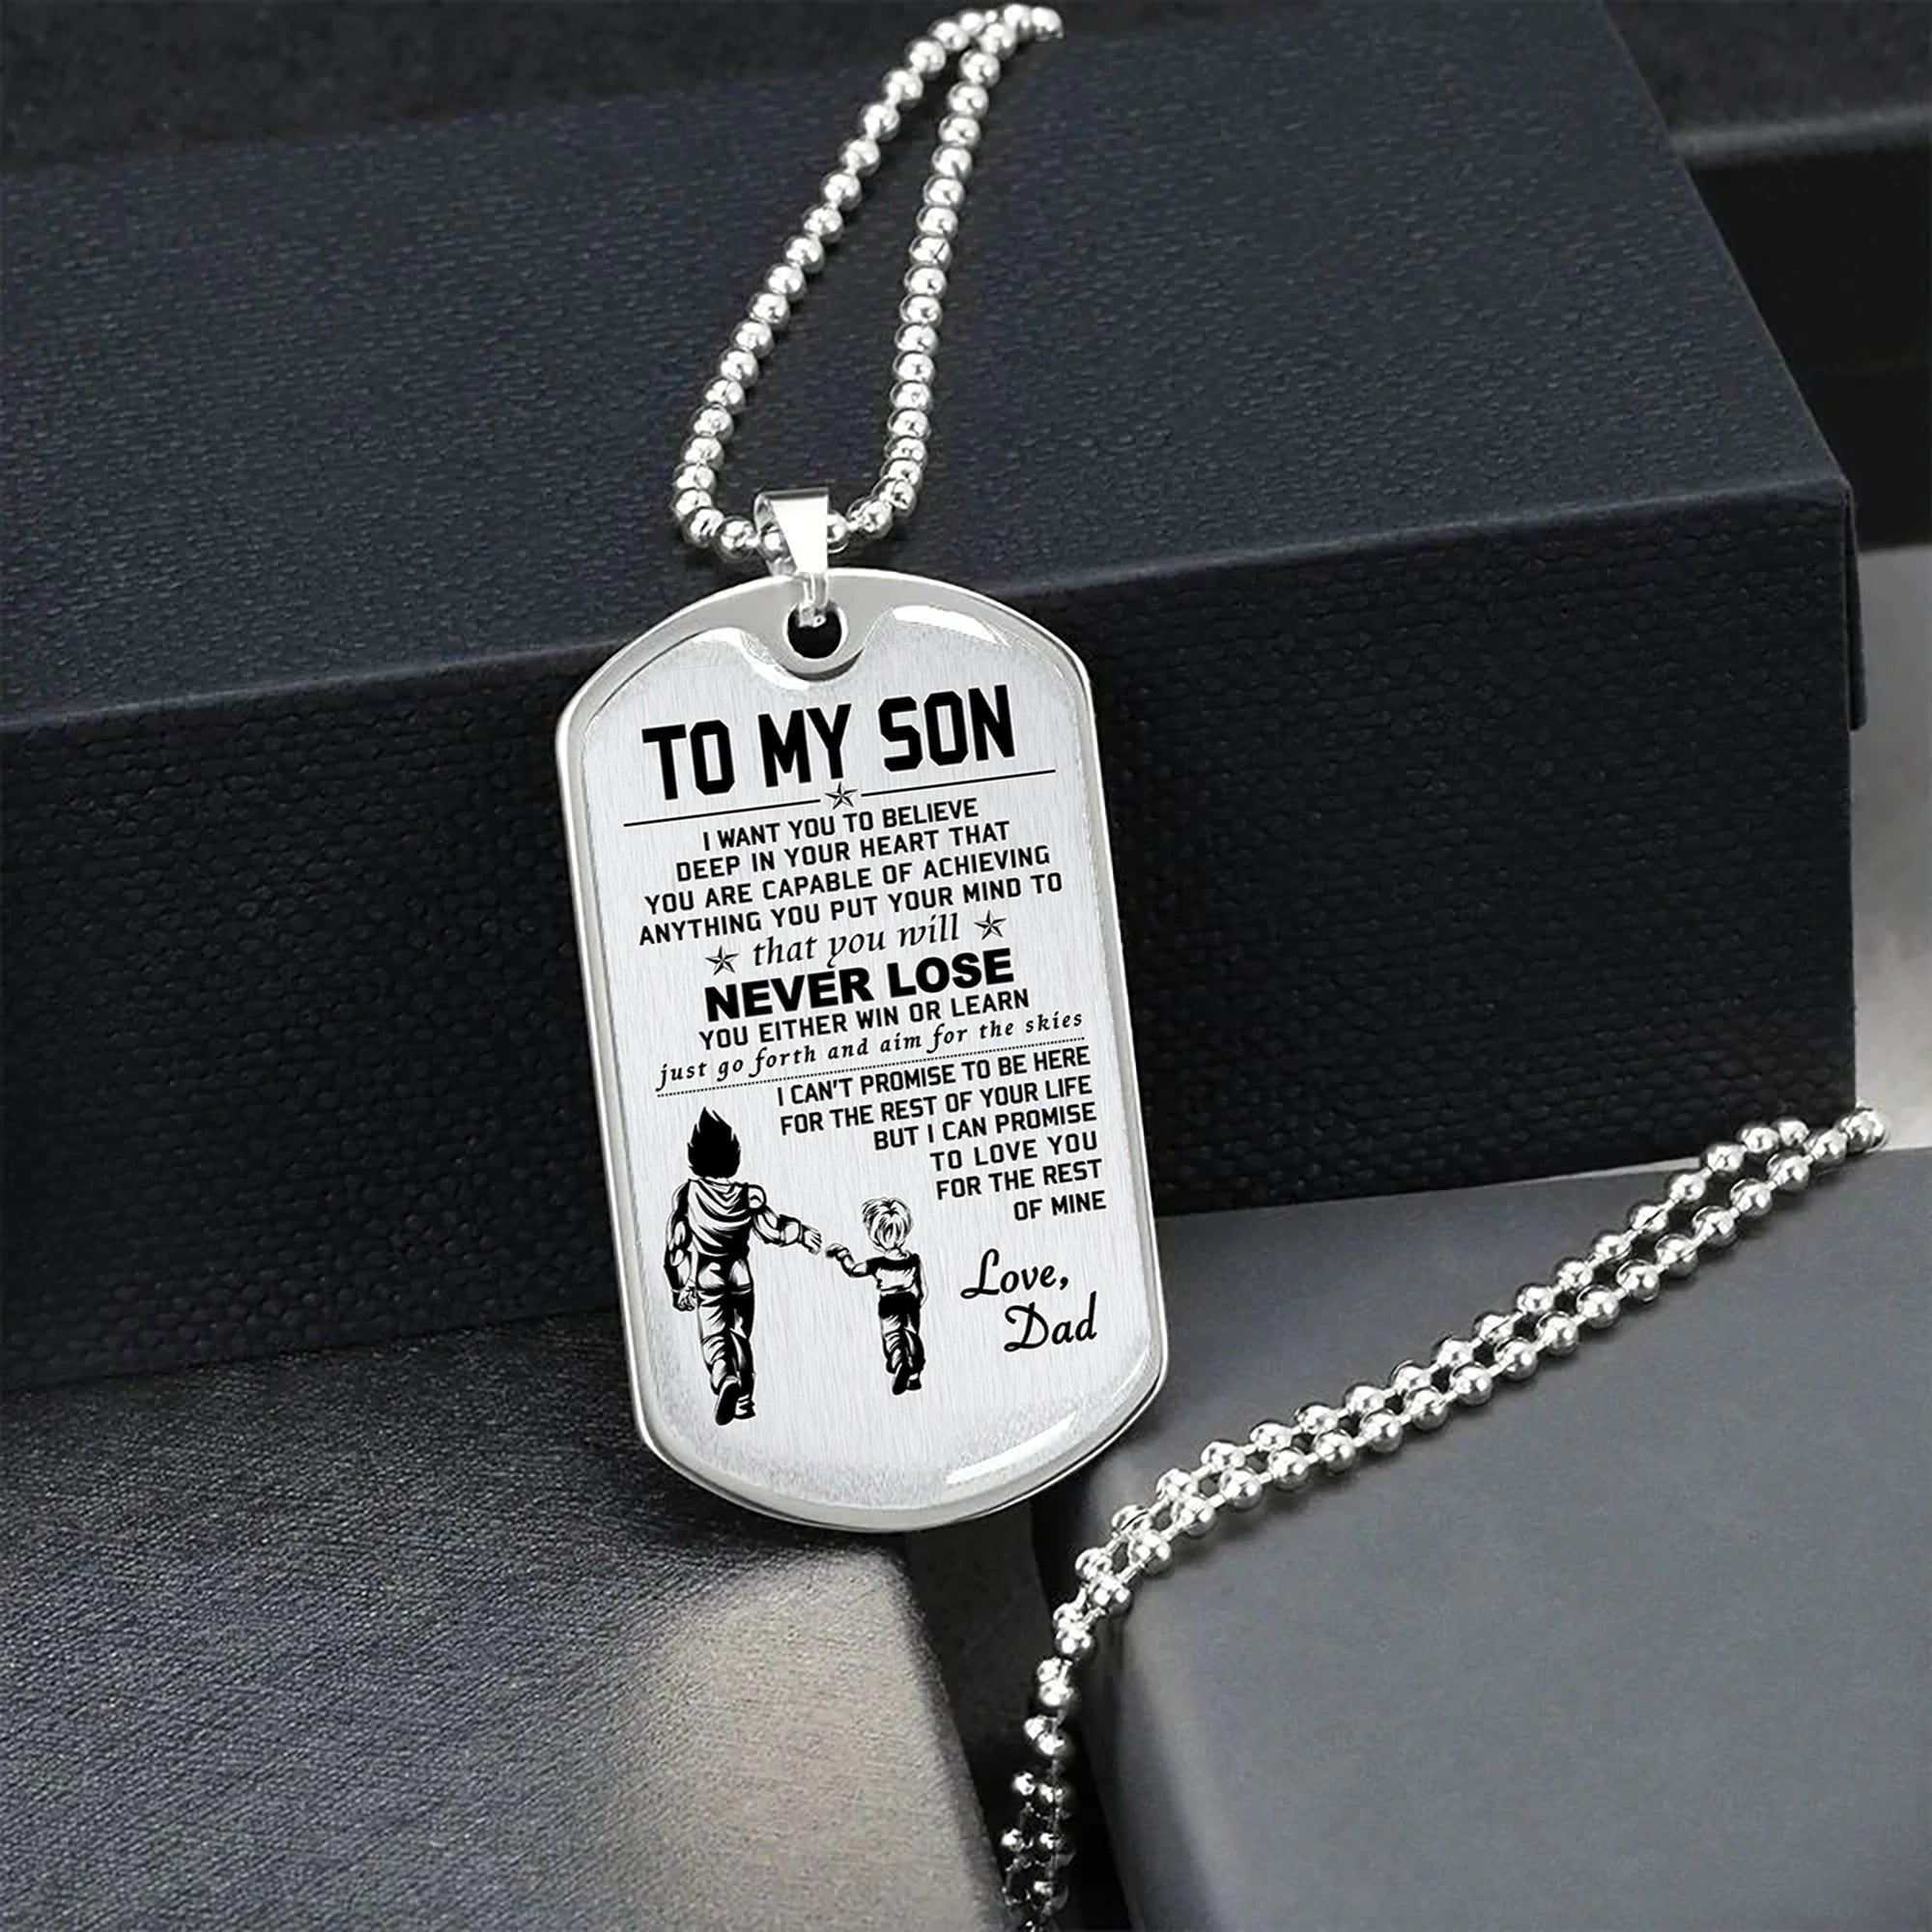 TM5 Call on me Brother - Dragon ball Goku Vegeta - Soldier - Engraved Dog Tag 18K Dog Tag Necklace gold all style